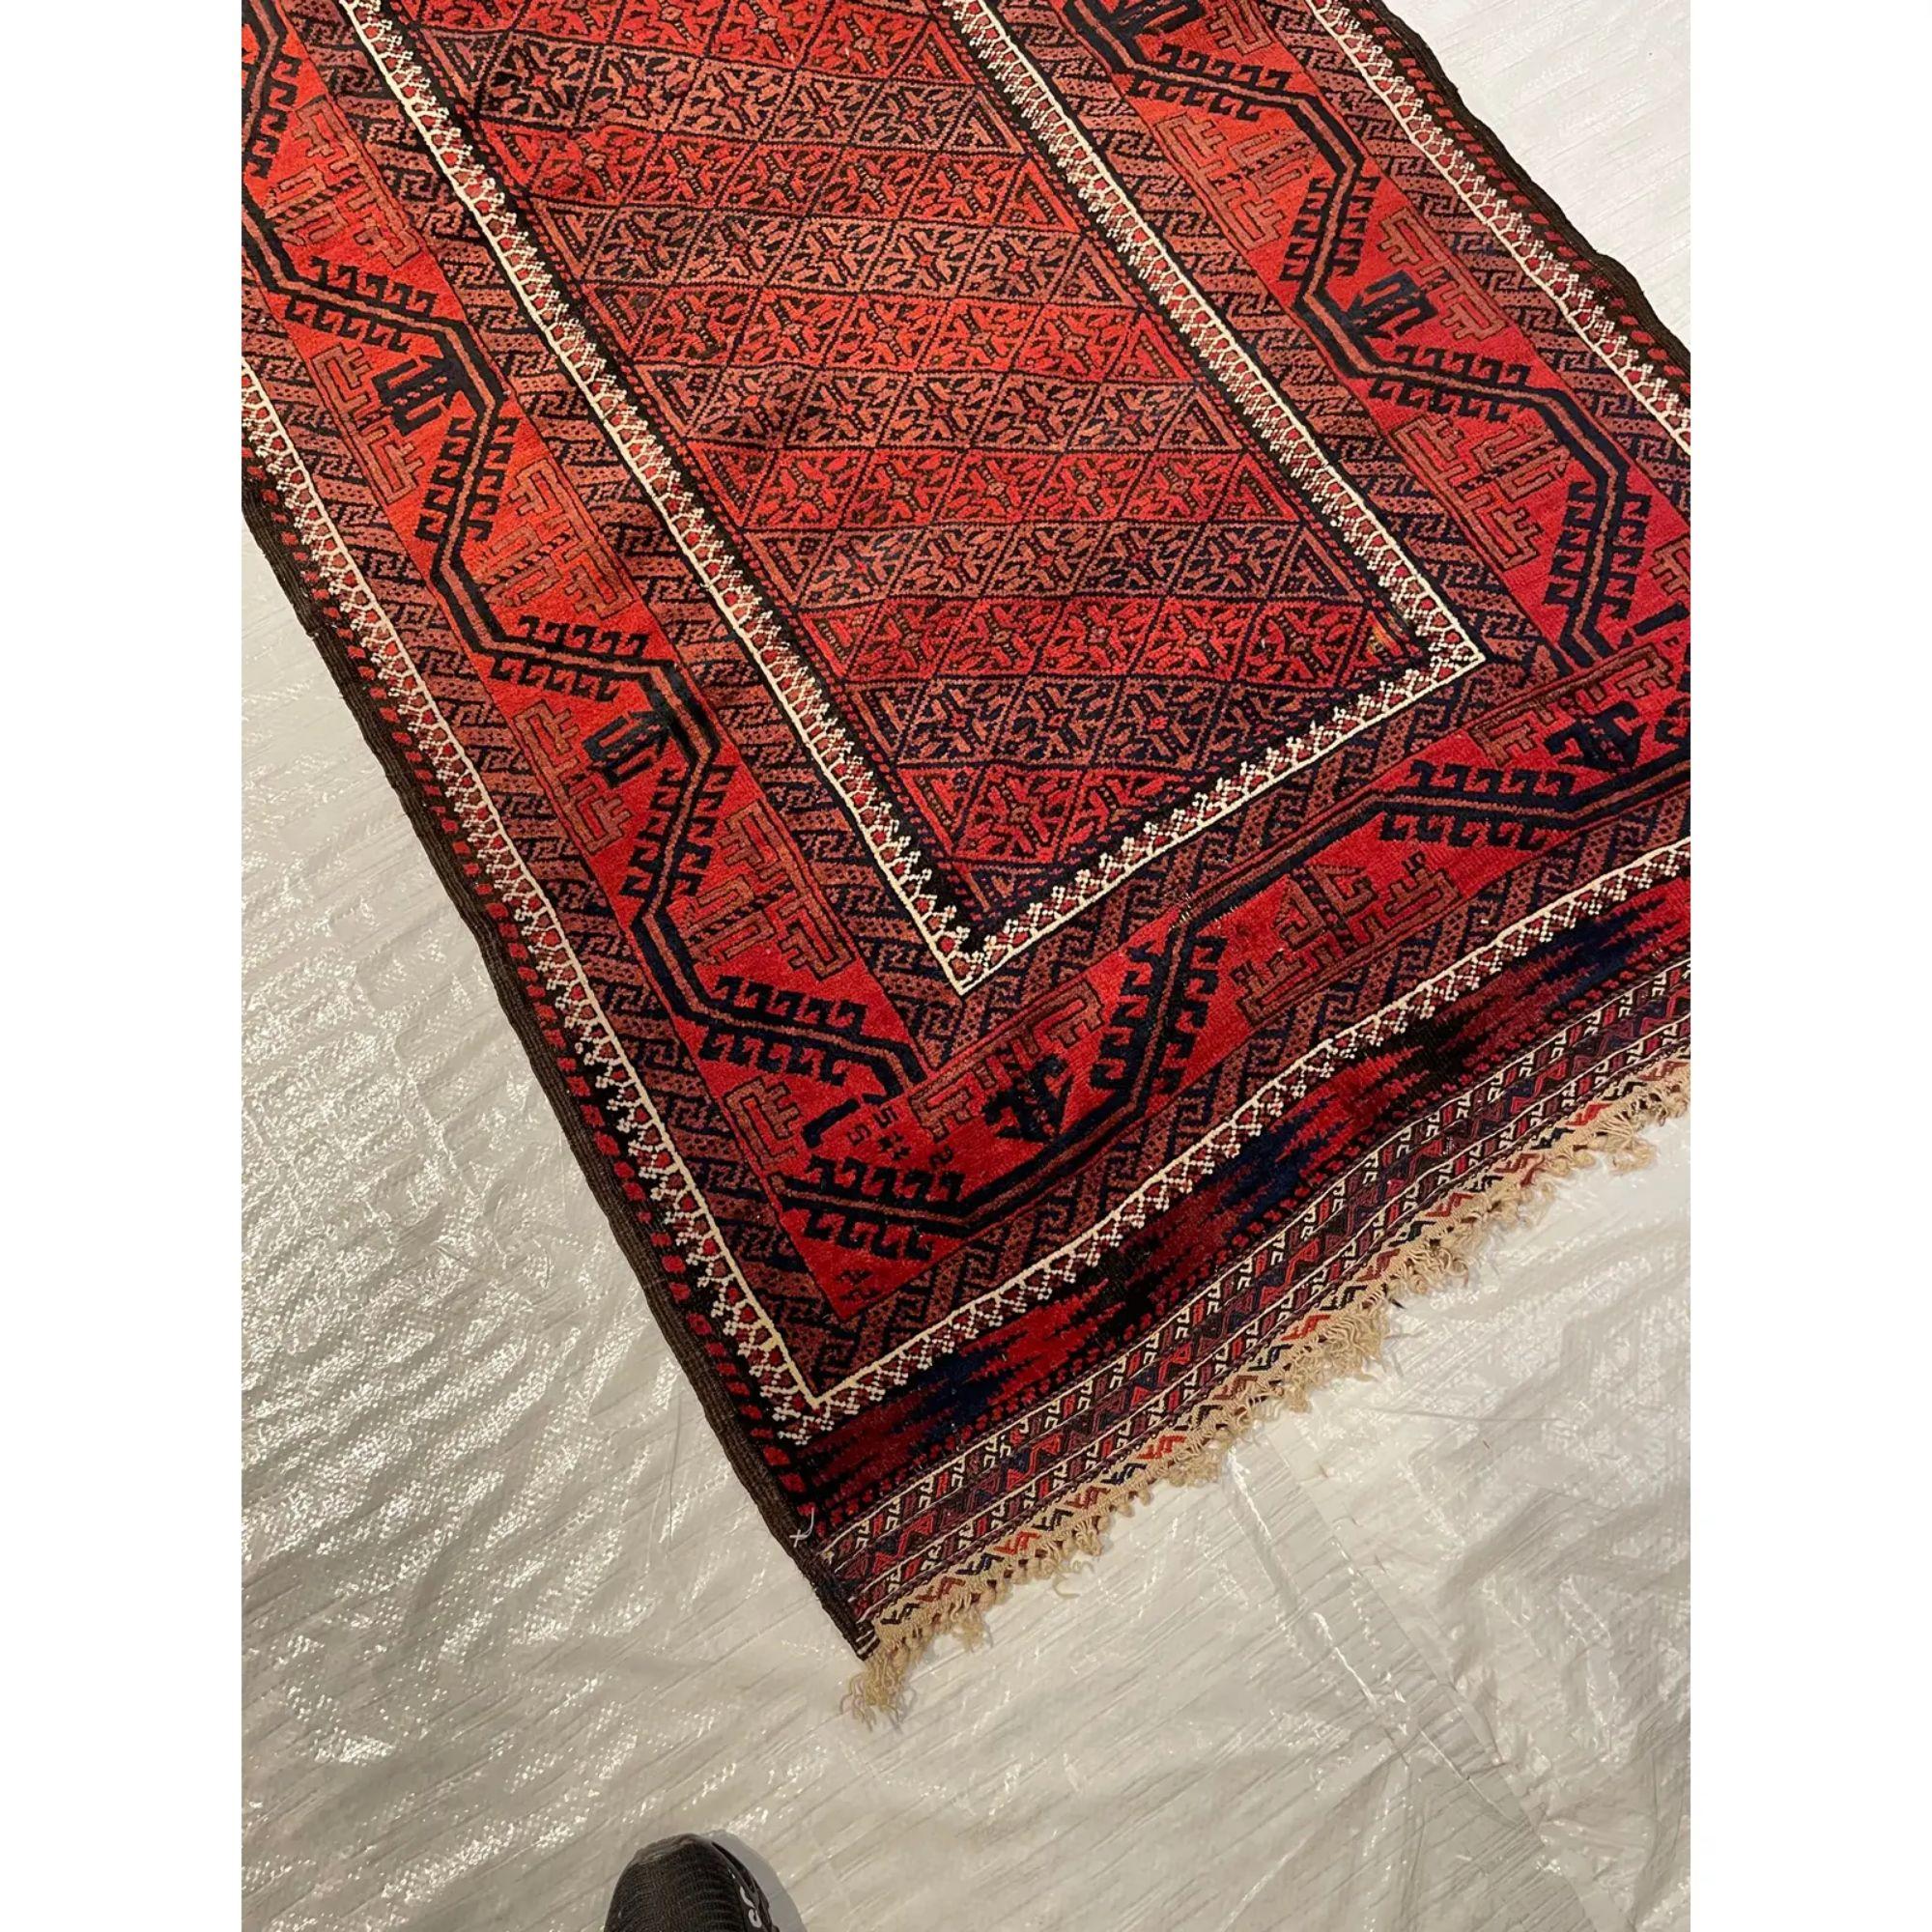 Antique Baloutch Stylish Geometric Design 6'7''x3'2''

one of a kind 1 of 1

more info upon request